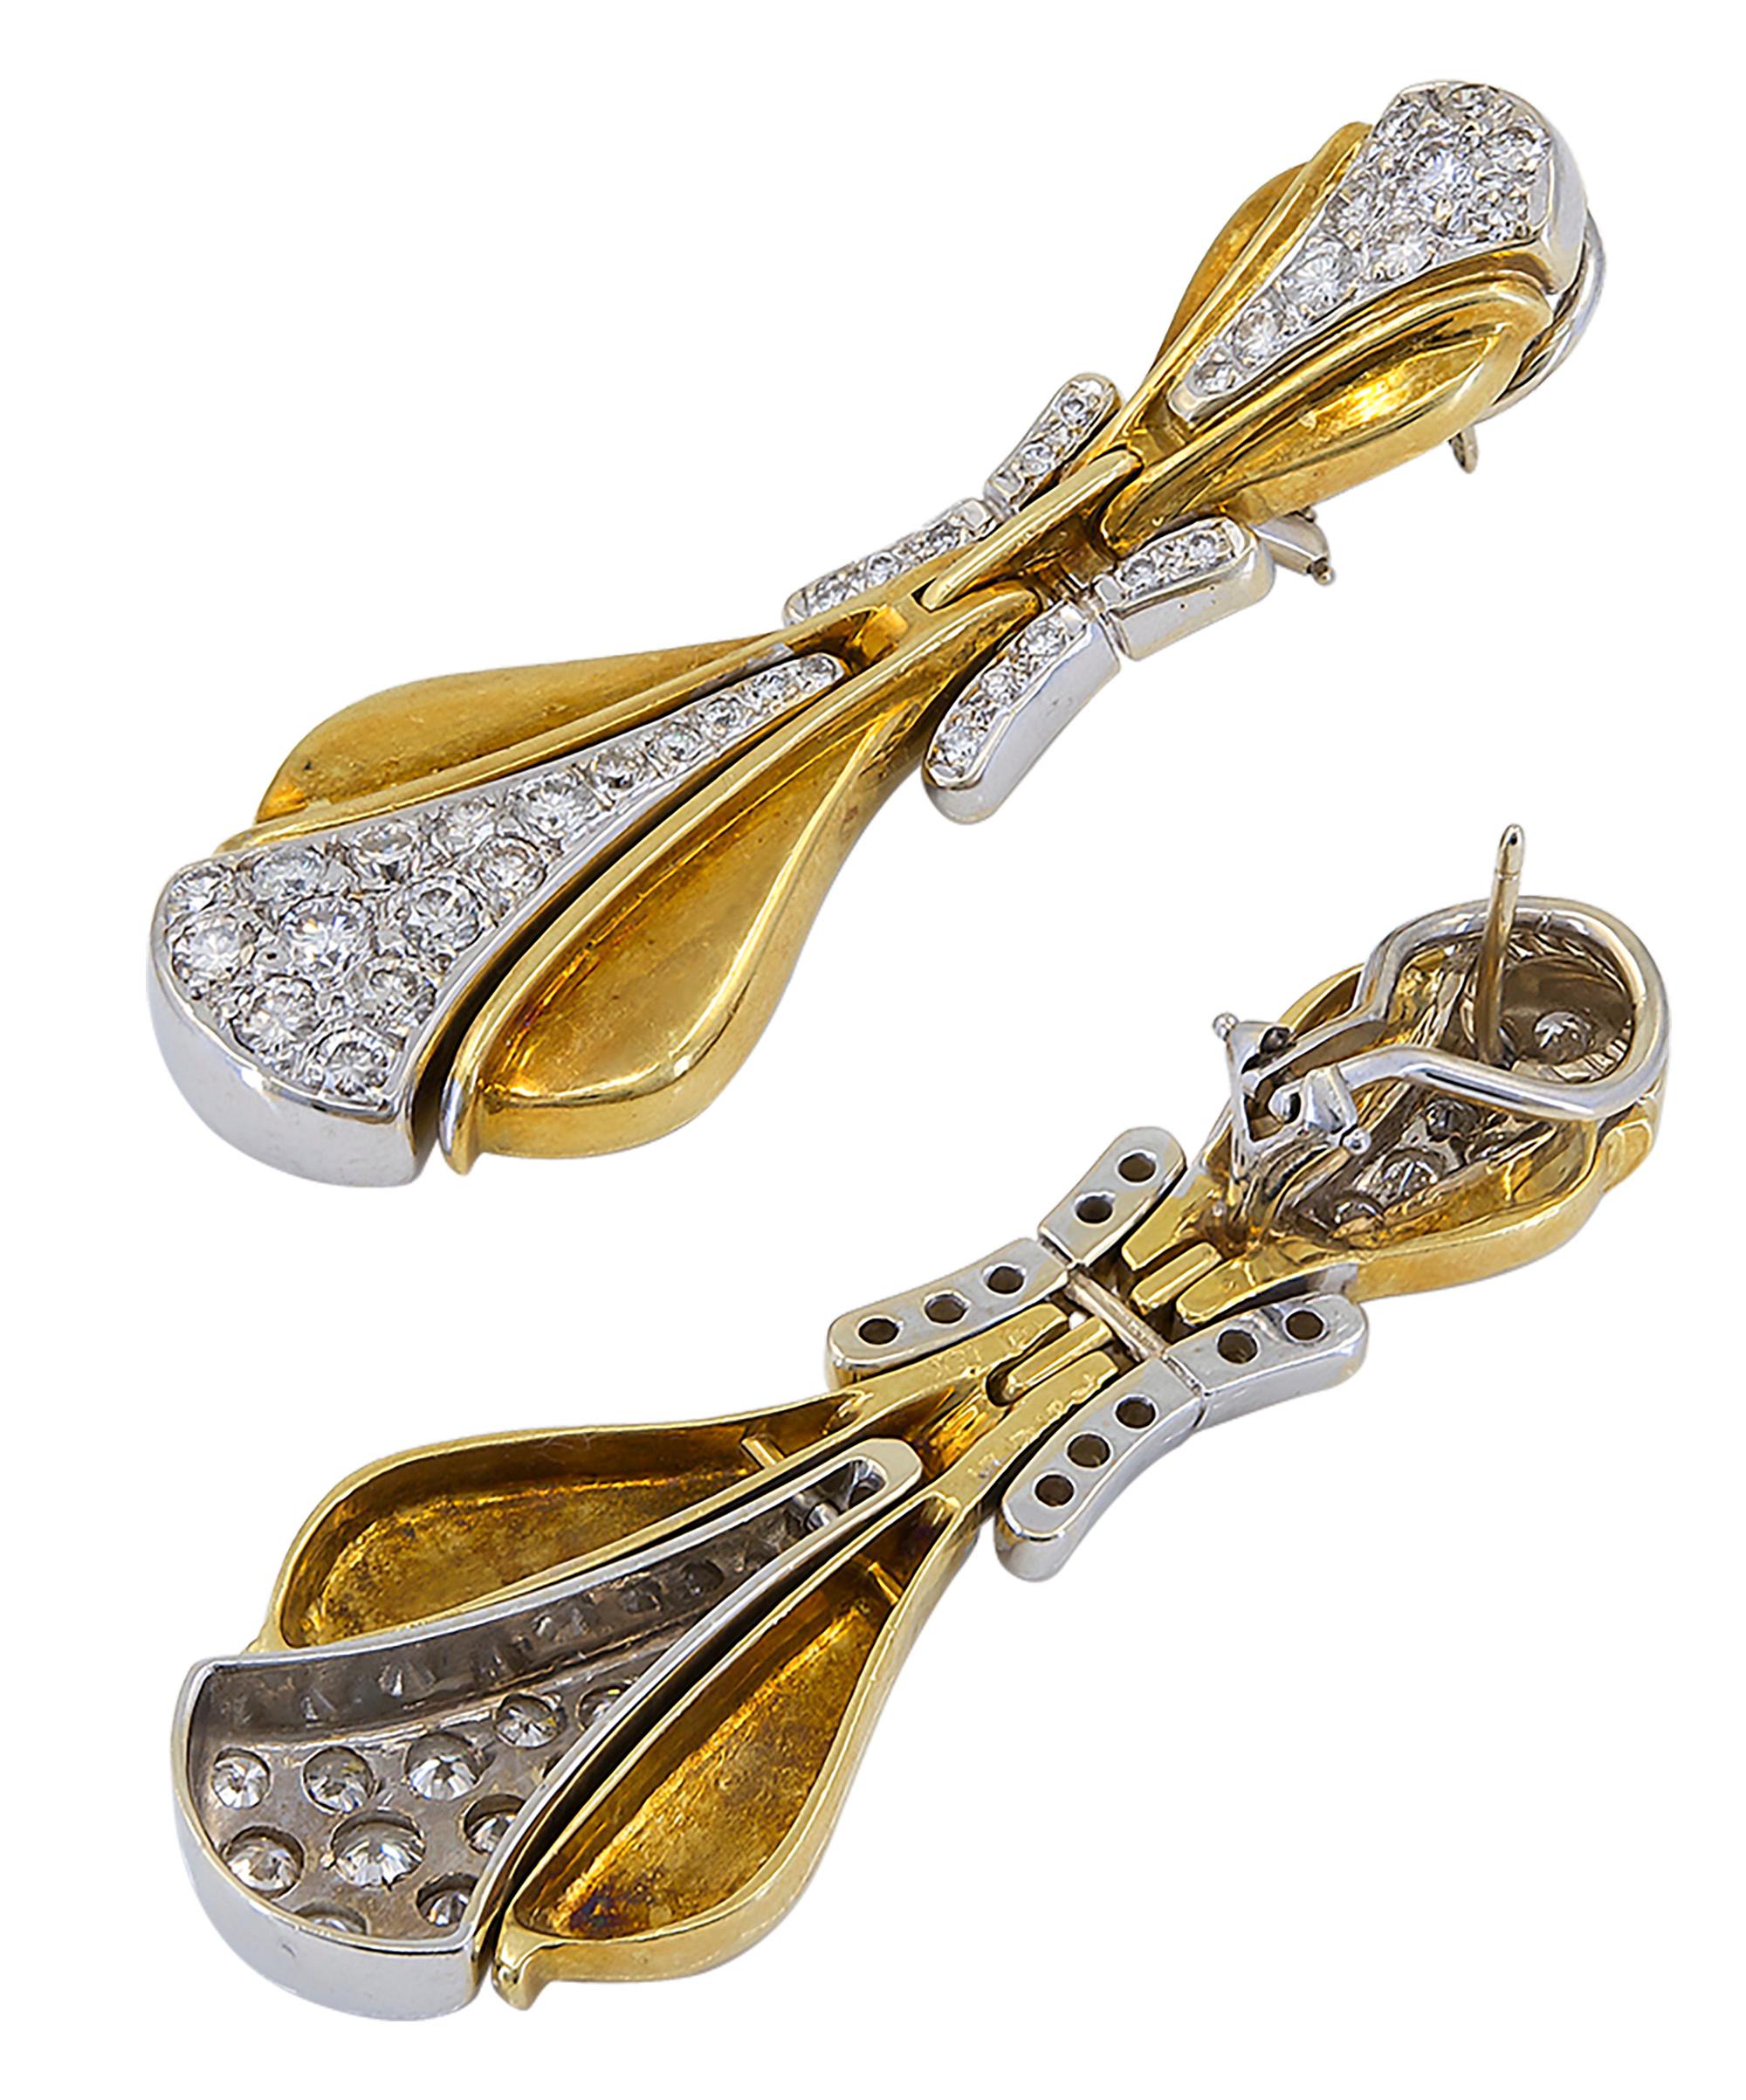 Beautiful 18k yellow and white gold door knockers earrings set with round diamonds.
Stamped H for Hammerman Brothers. Serial #7565.
Gold weighs 34.65 grams.
Length of the earrings is 2.2 inches (5.6 cm).
